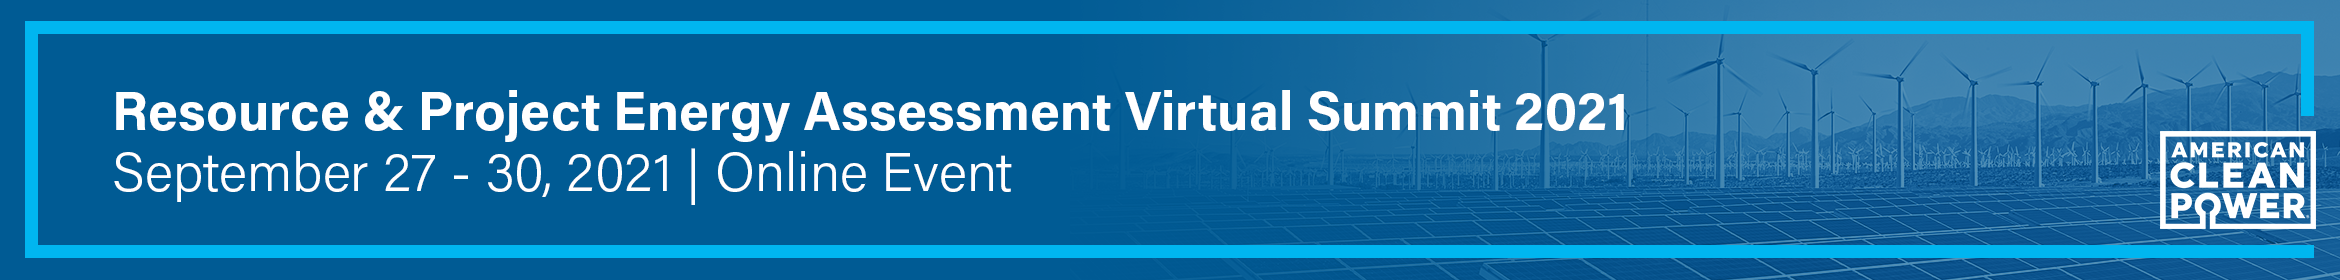 Resource & Project Energy Assessment Virtual Summit 2021 Main banner